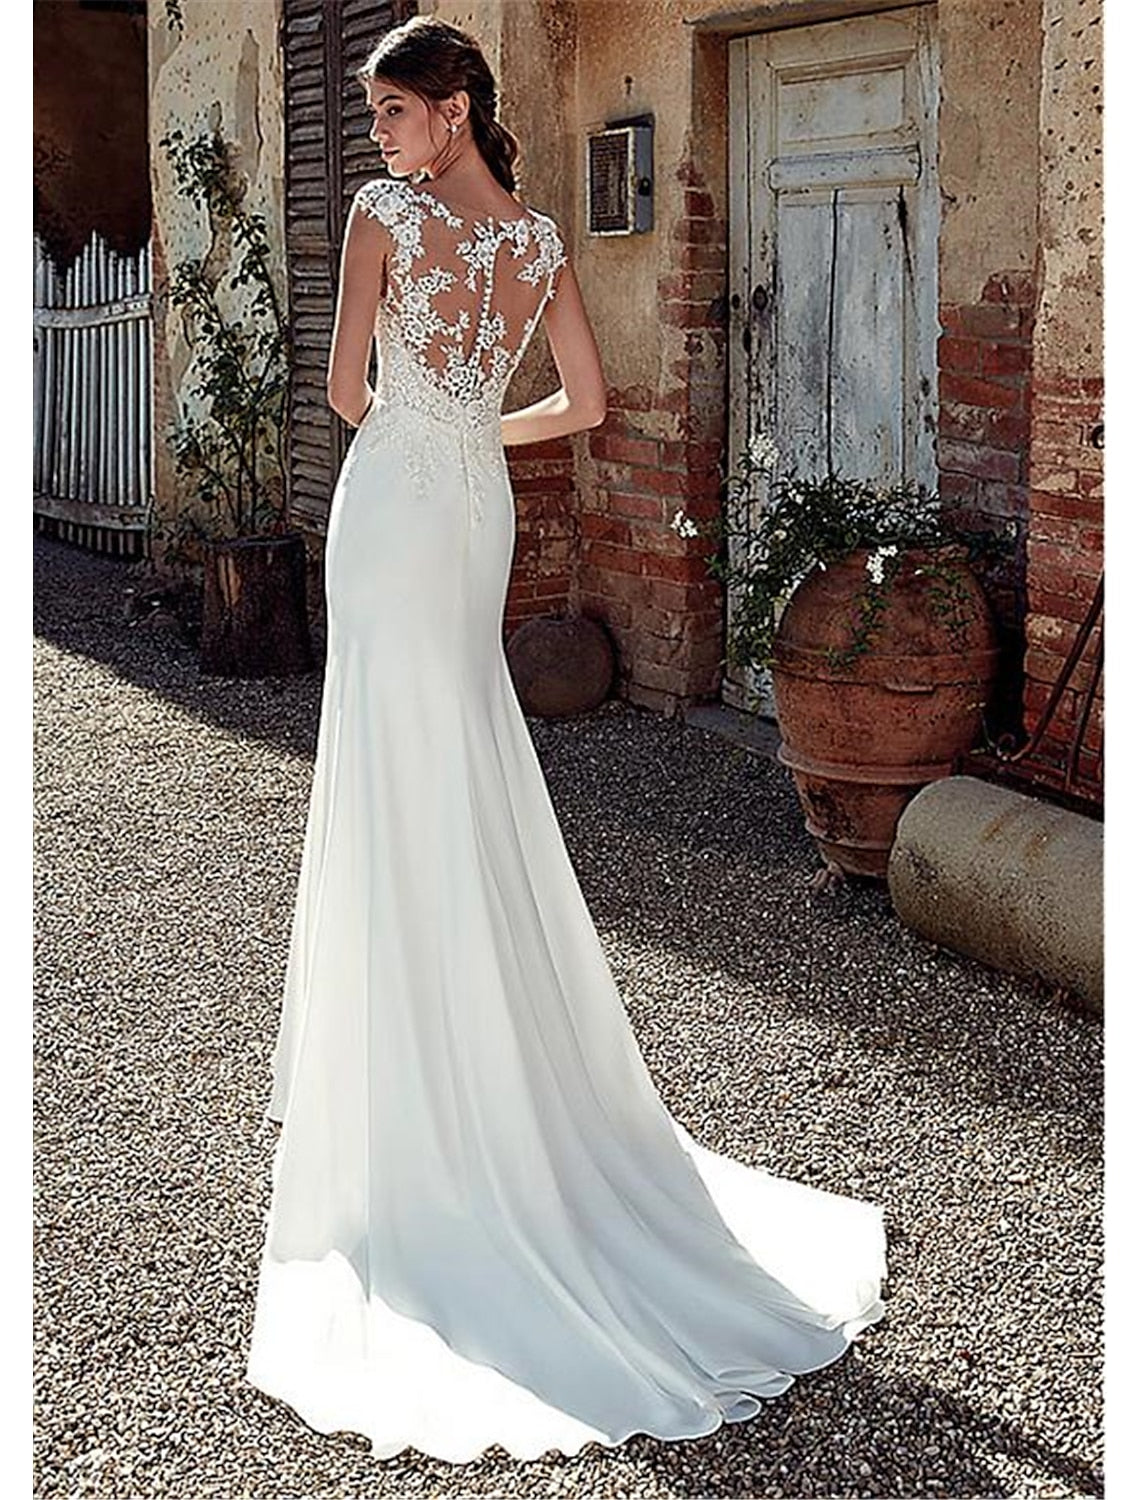 Beach Open Back Wedding Dresses Mermaid / Trumpet Illusion Neck Cap Sleeve Court Train Chiffon Bridal Gowns With Appliques